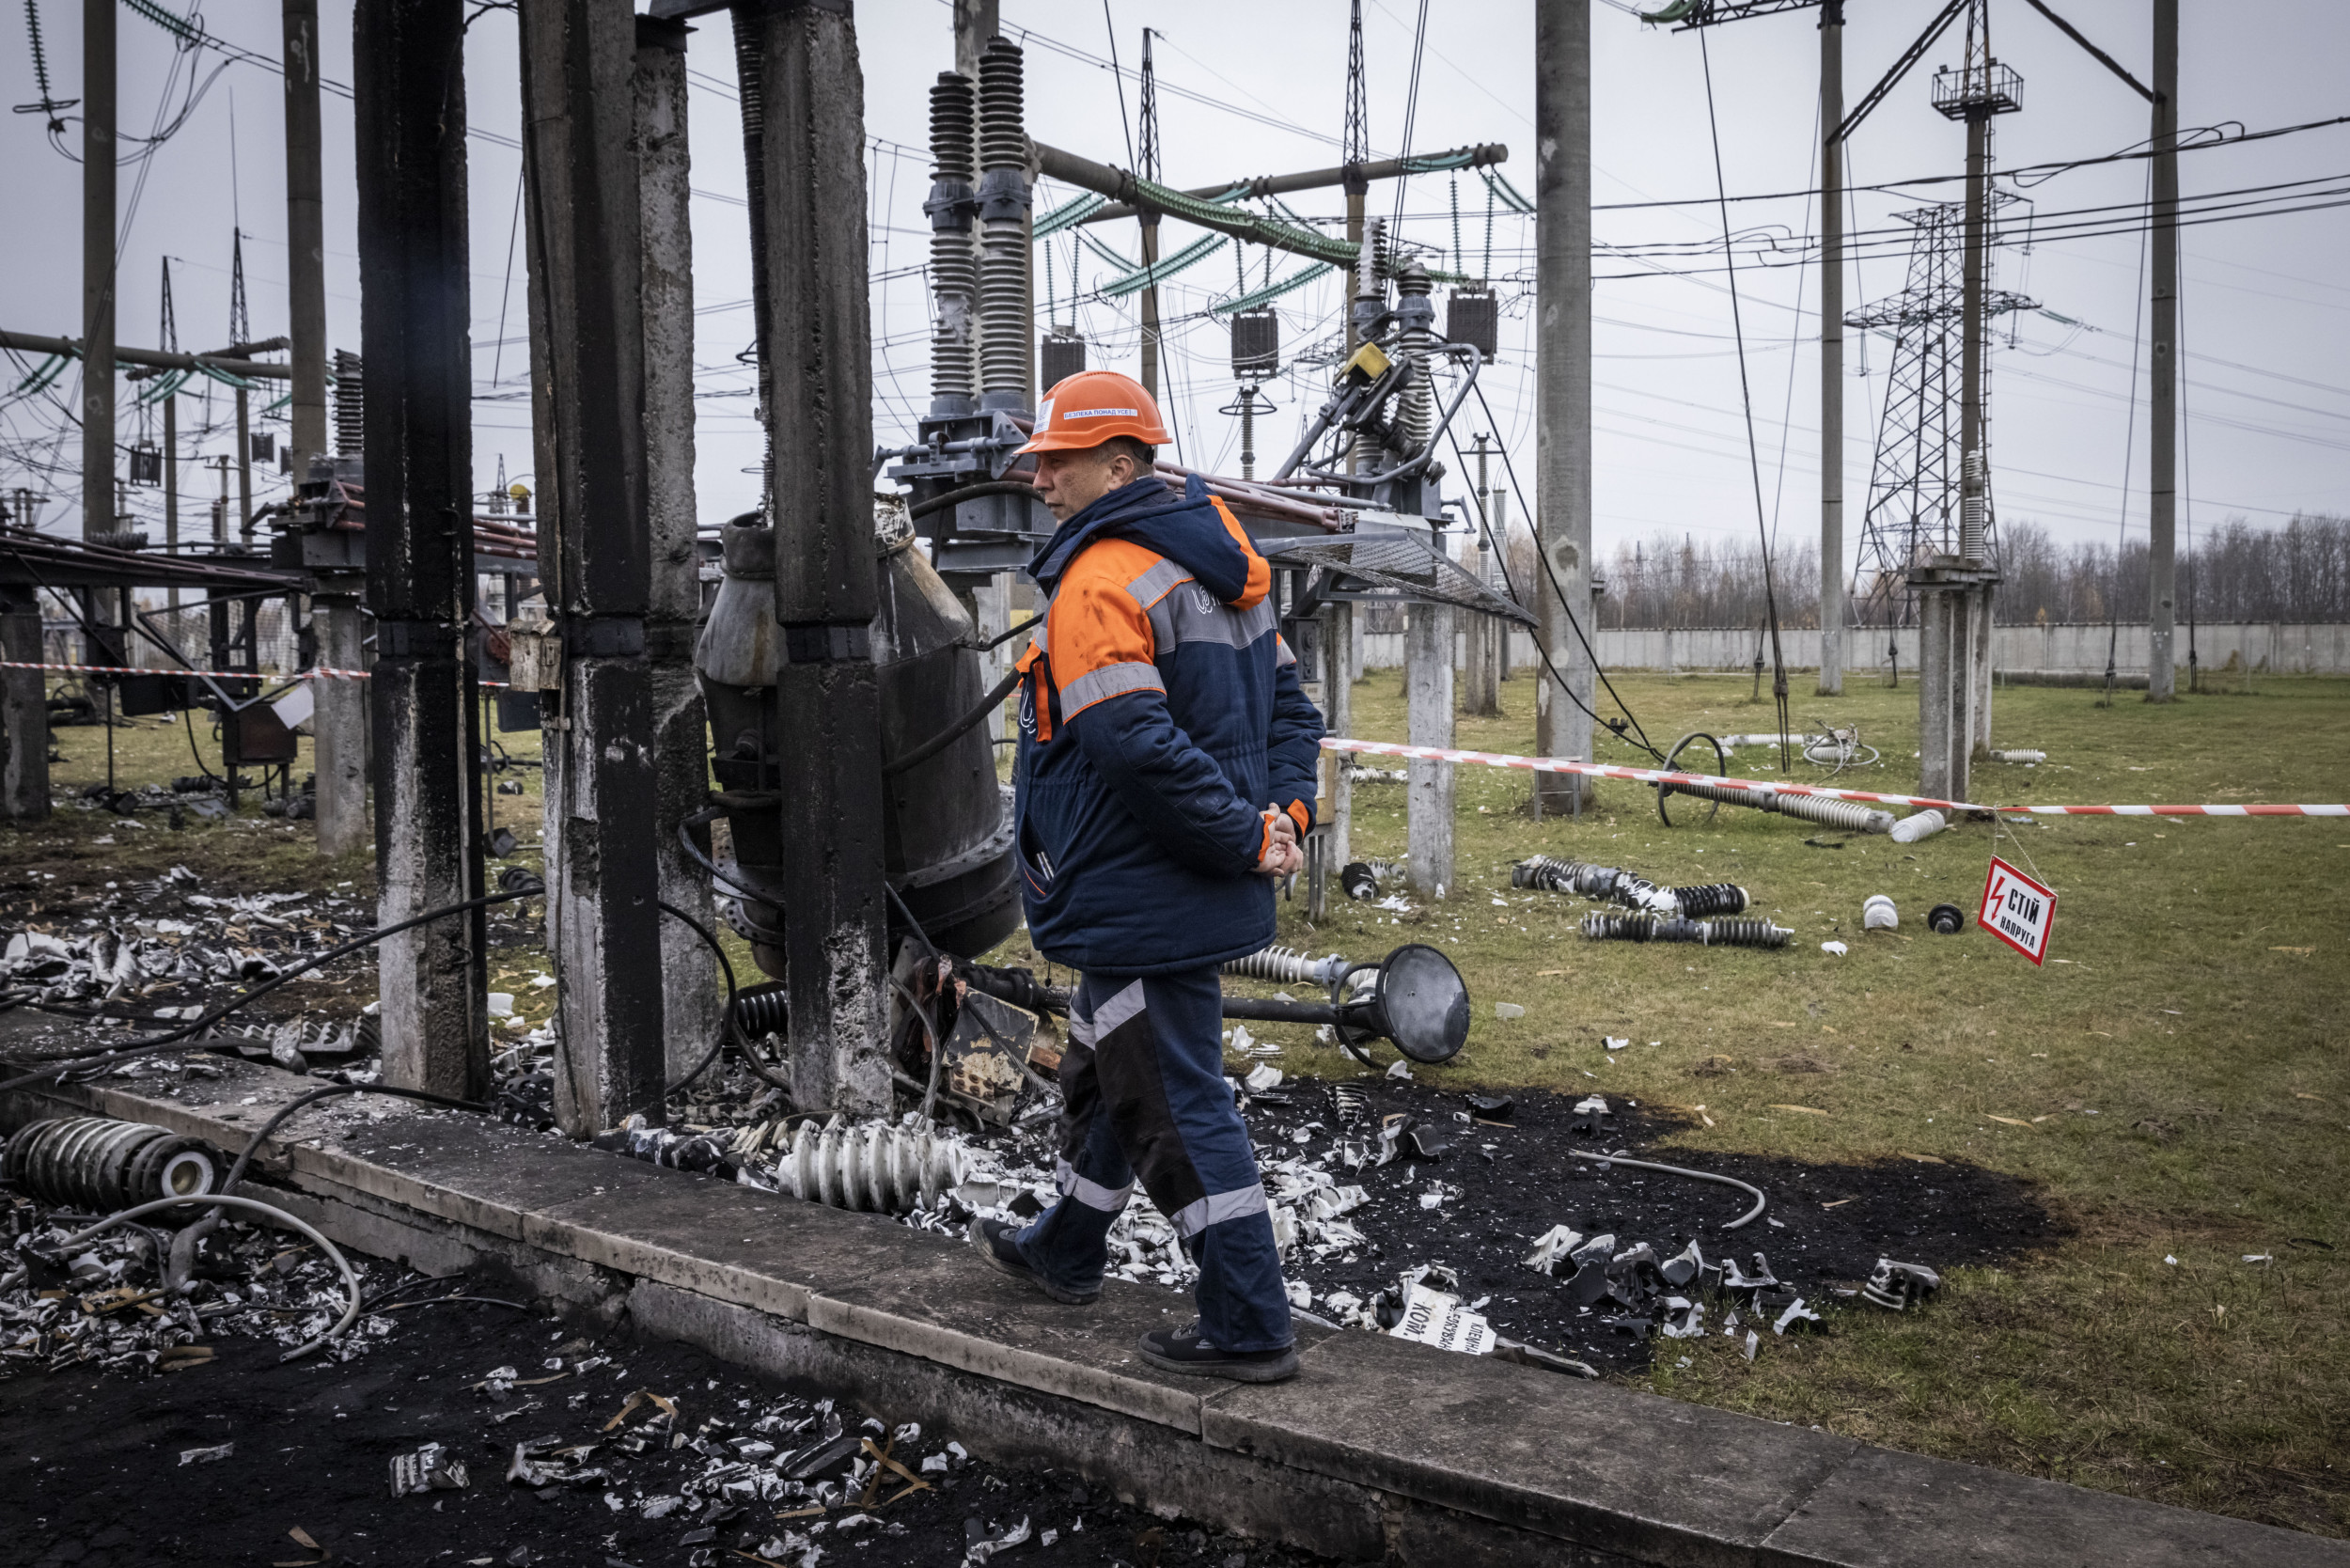 Ukraine's Energy Blackouts Will Most Likely Last Through March: Utility